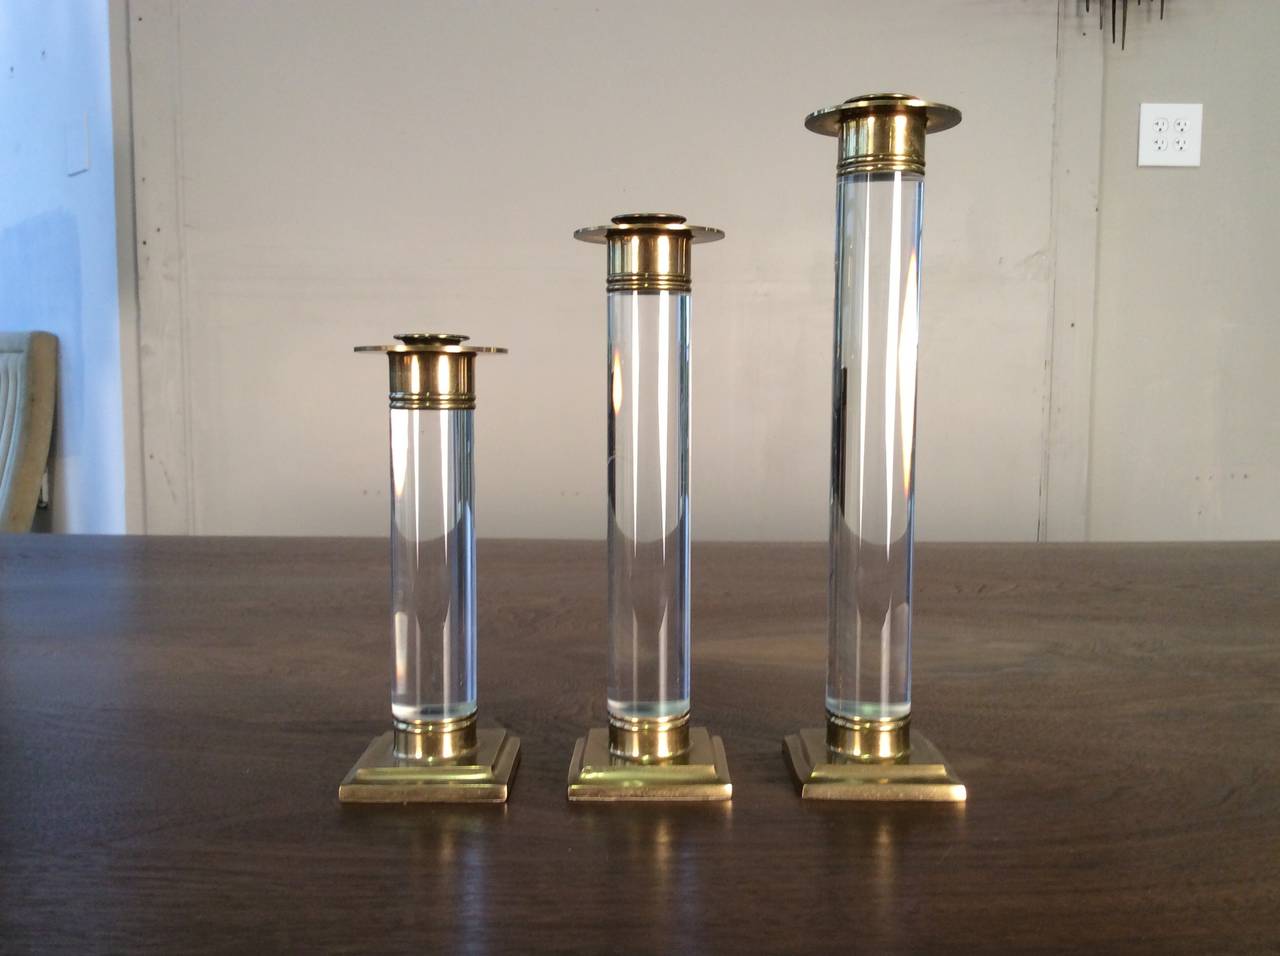 A Trio of Lucite and Brass Candlestick Holders in the style of Karl Springer. This set is in fantastic condition with beautiful patina. Lucite shows very well with only a few light surface scratched.

Dimensions:

7 1/2